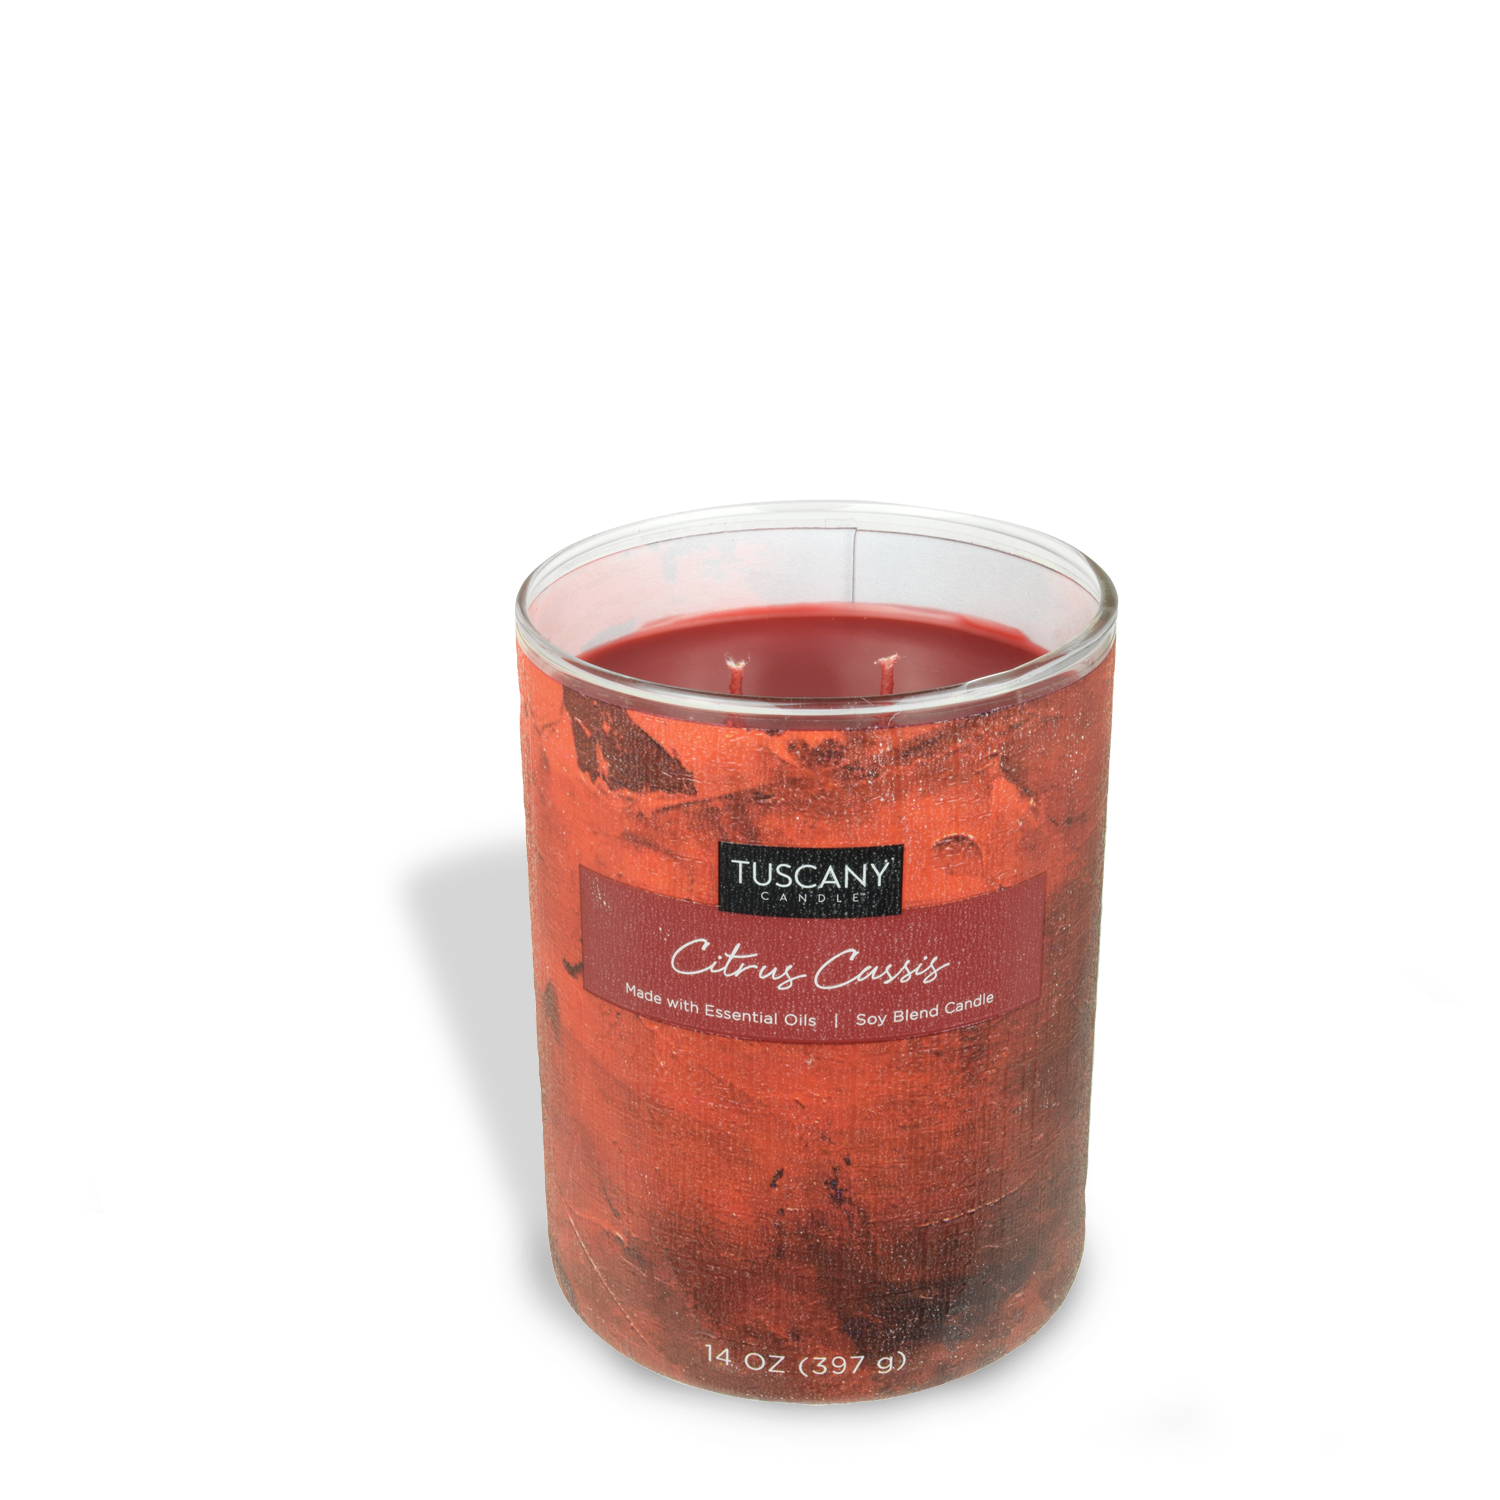 A Citrus Cassis Scented Jar Candle (14 oz) from the Tuscany Candle Home Décor Collection on a white background.